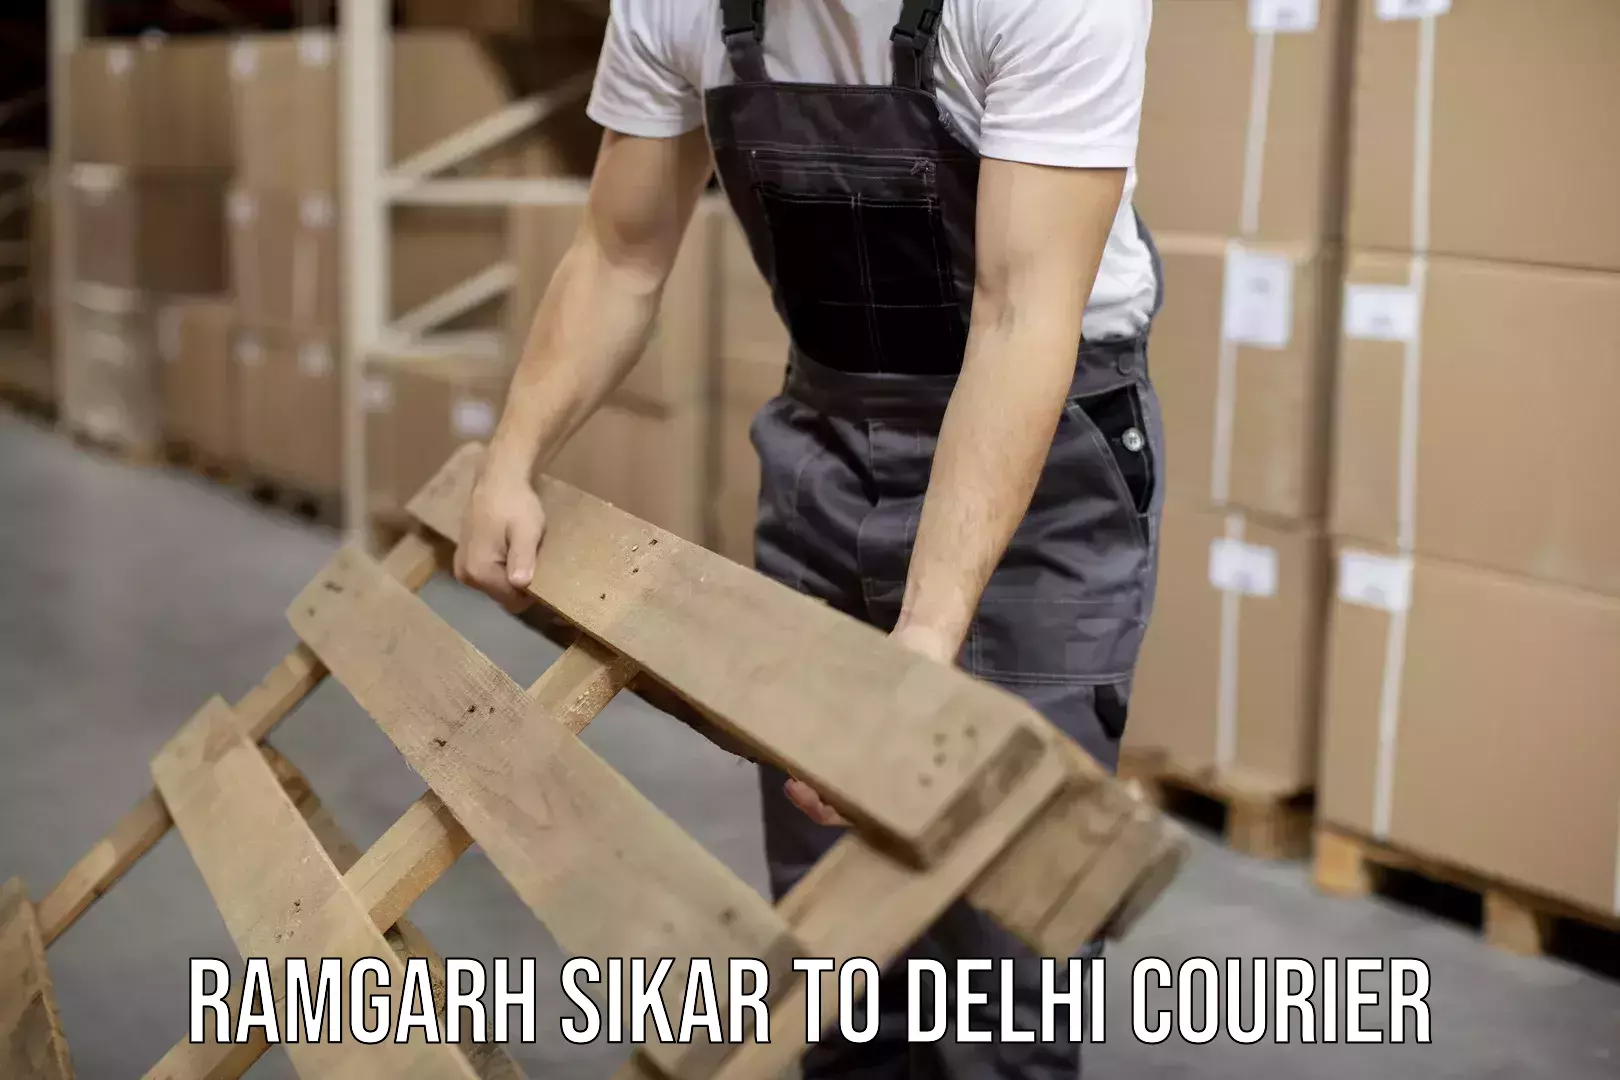 Courier service efficiency Ramgarh Sikar to NIT Delhi